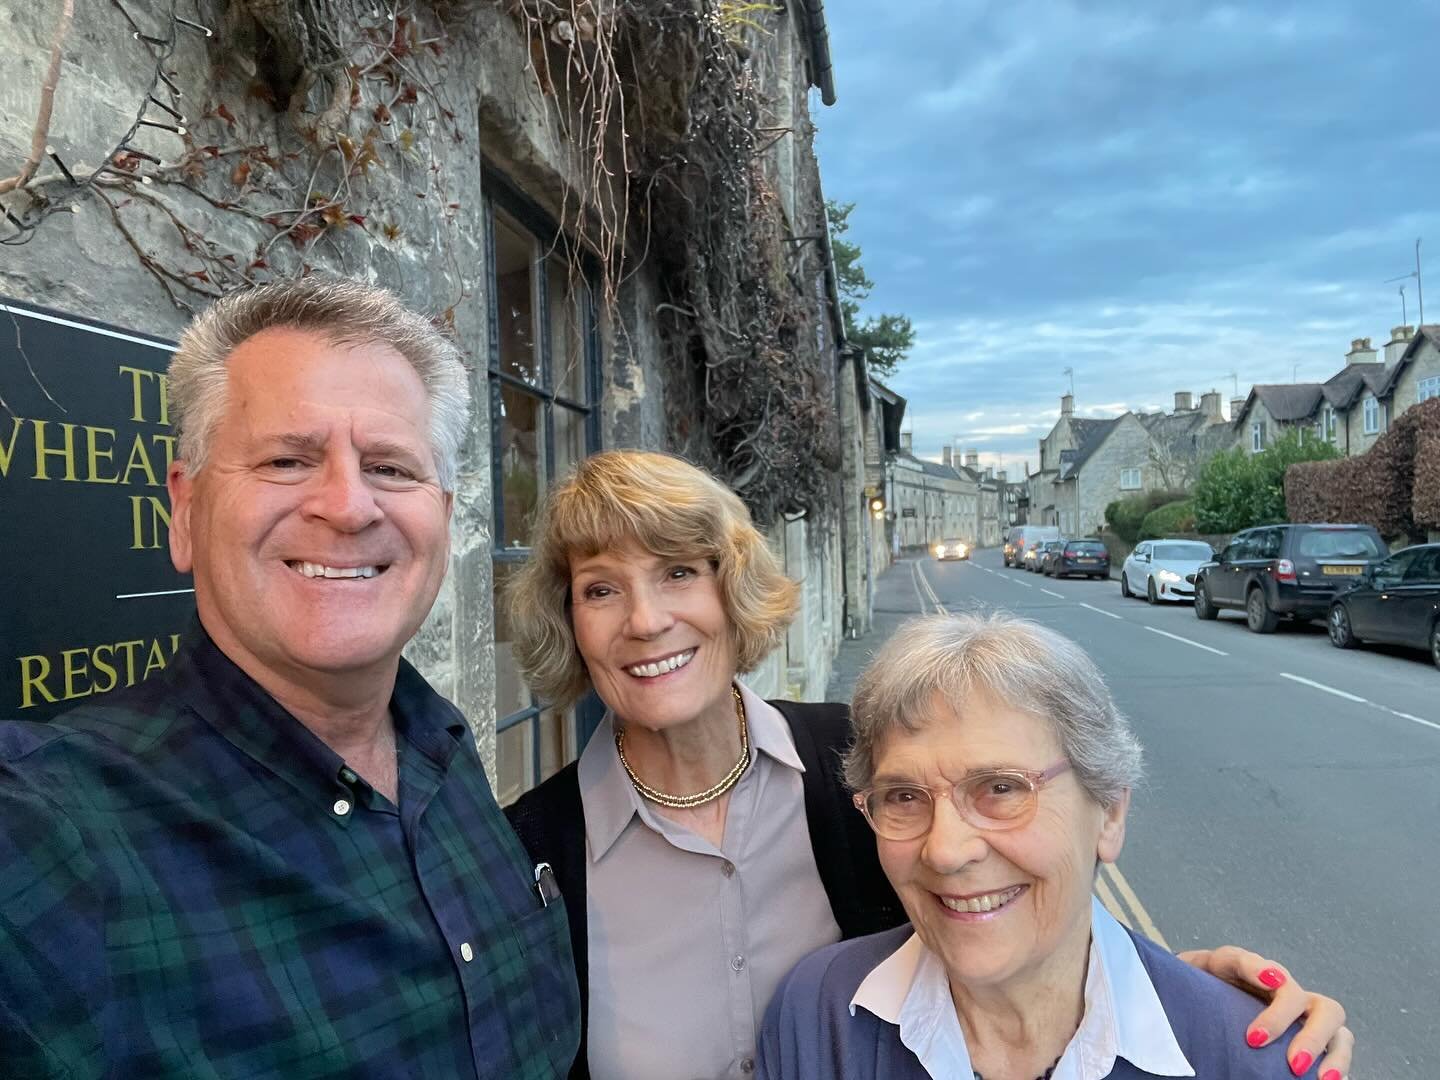 Fun times in Northleach checking in on Mum and considering our new marketing strategies now we have Henry available through the Ingram Spark distribution including Amazon and bookstores in the UK and US.
Dinner at the Wheatsheaf is always a great way